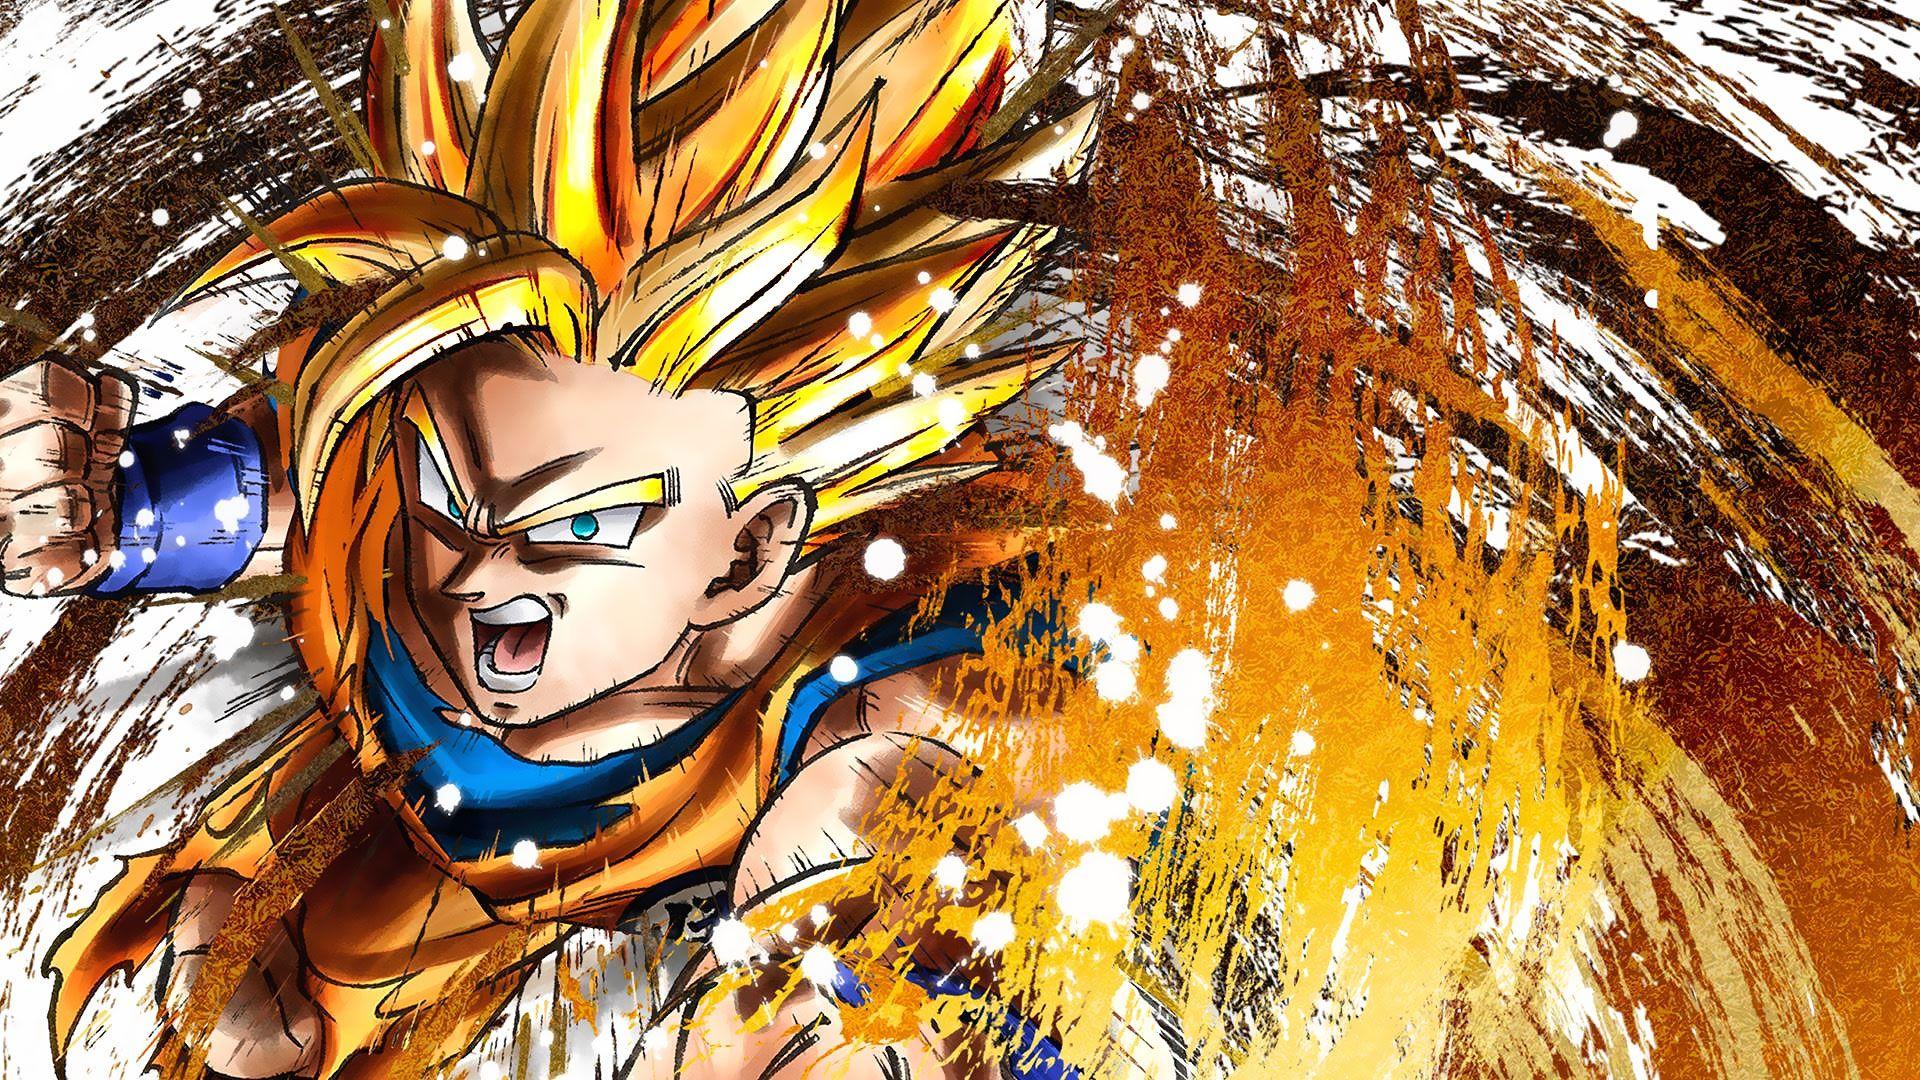 Dragon Ball FighterZ Review - An Amazing Fighter, I'm Just Saiyan